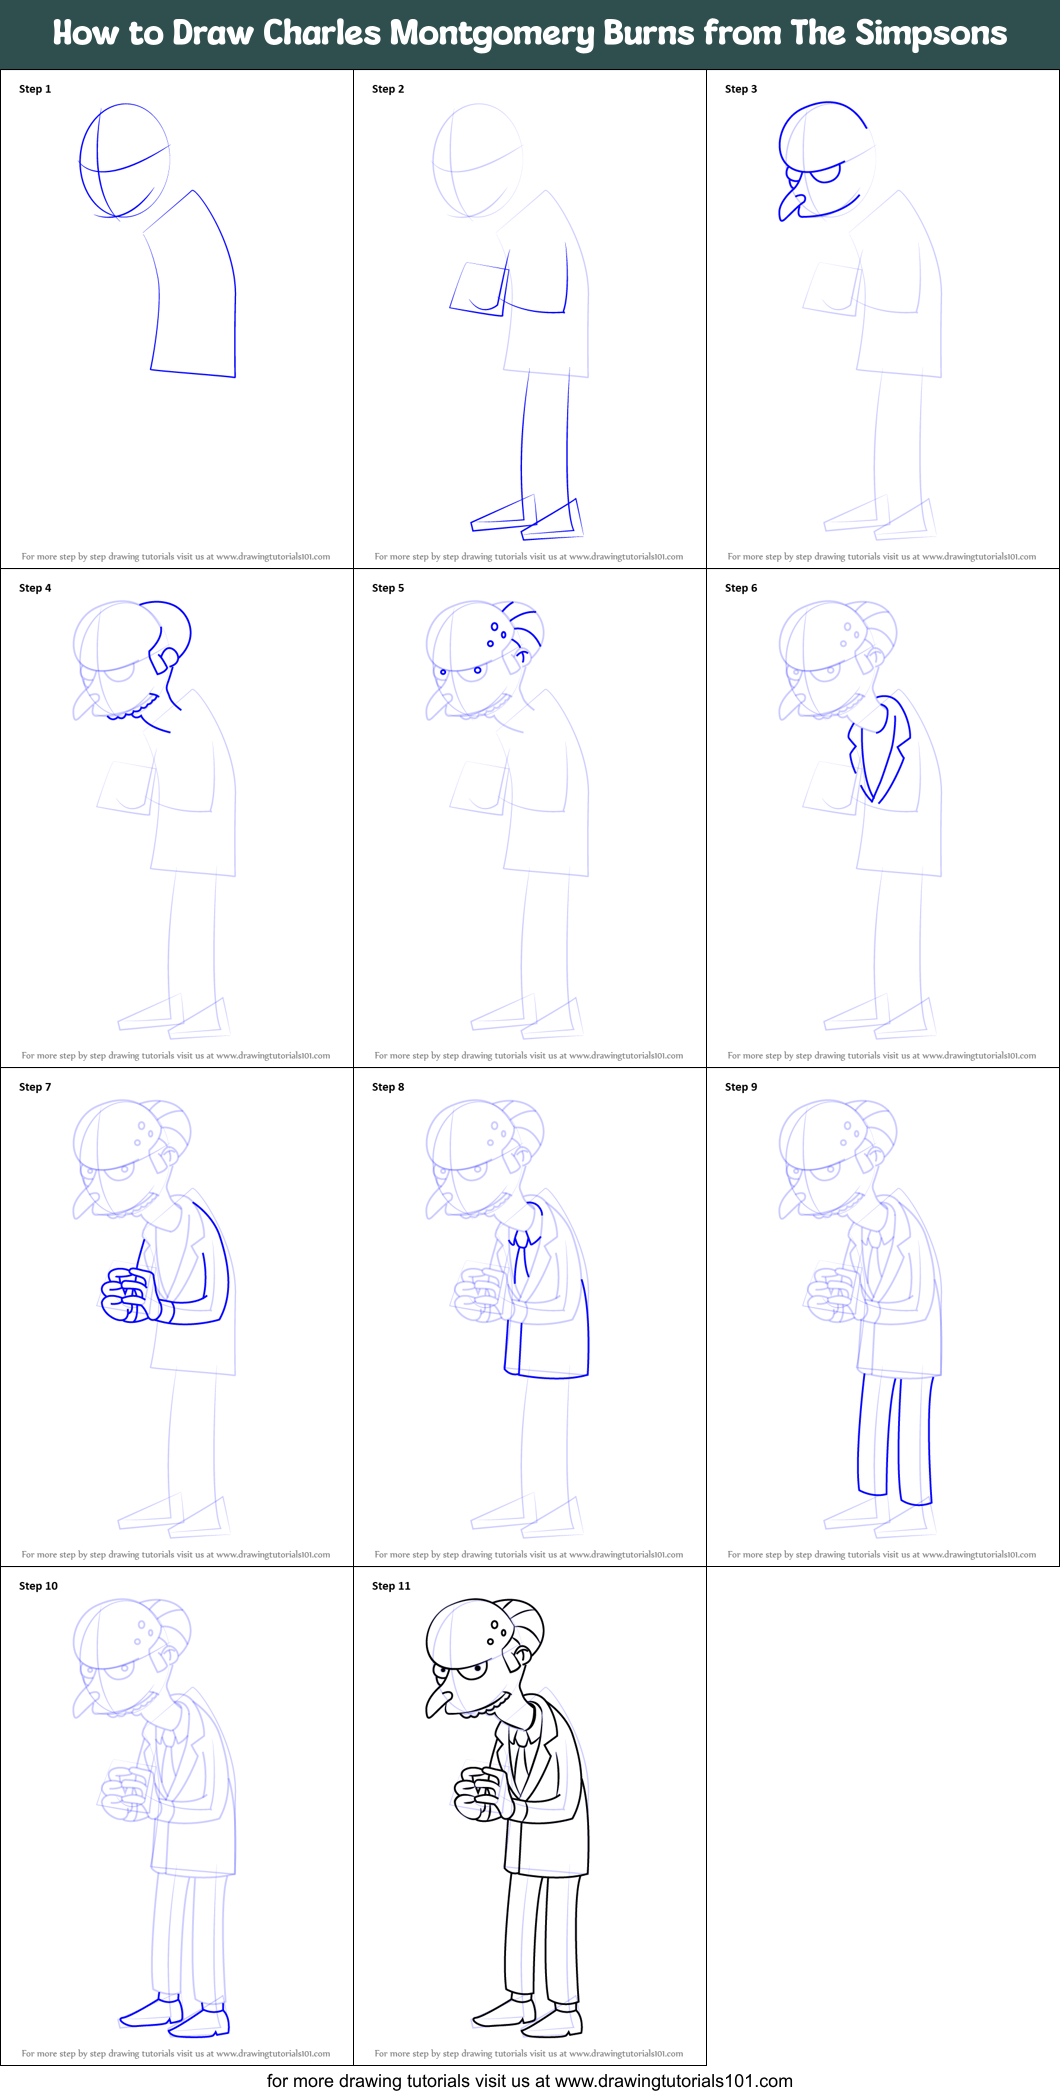 How to Draw Charles Montgomery Burns from The Simpsons printable step